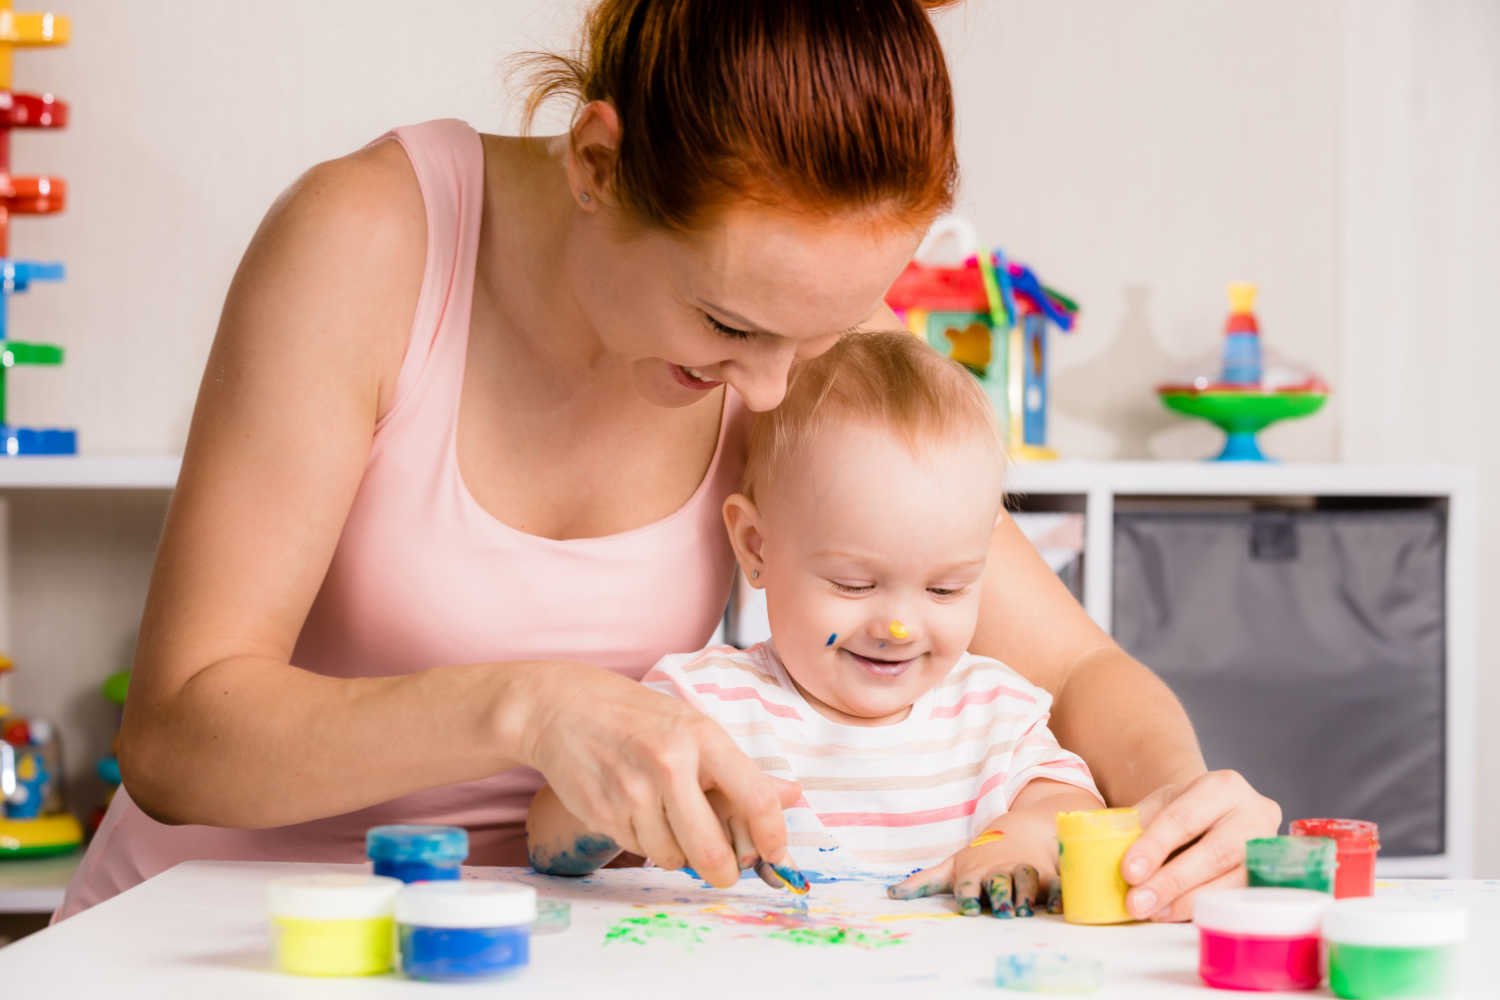 Precautions to be Taken For Finger Painting